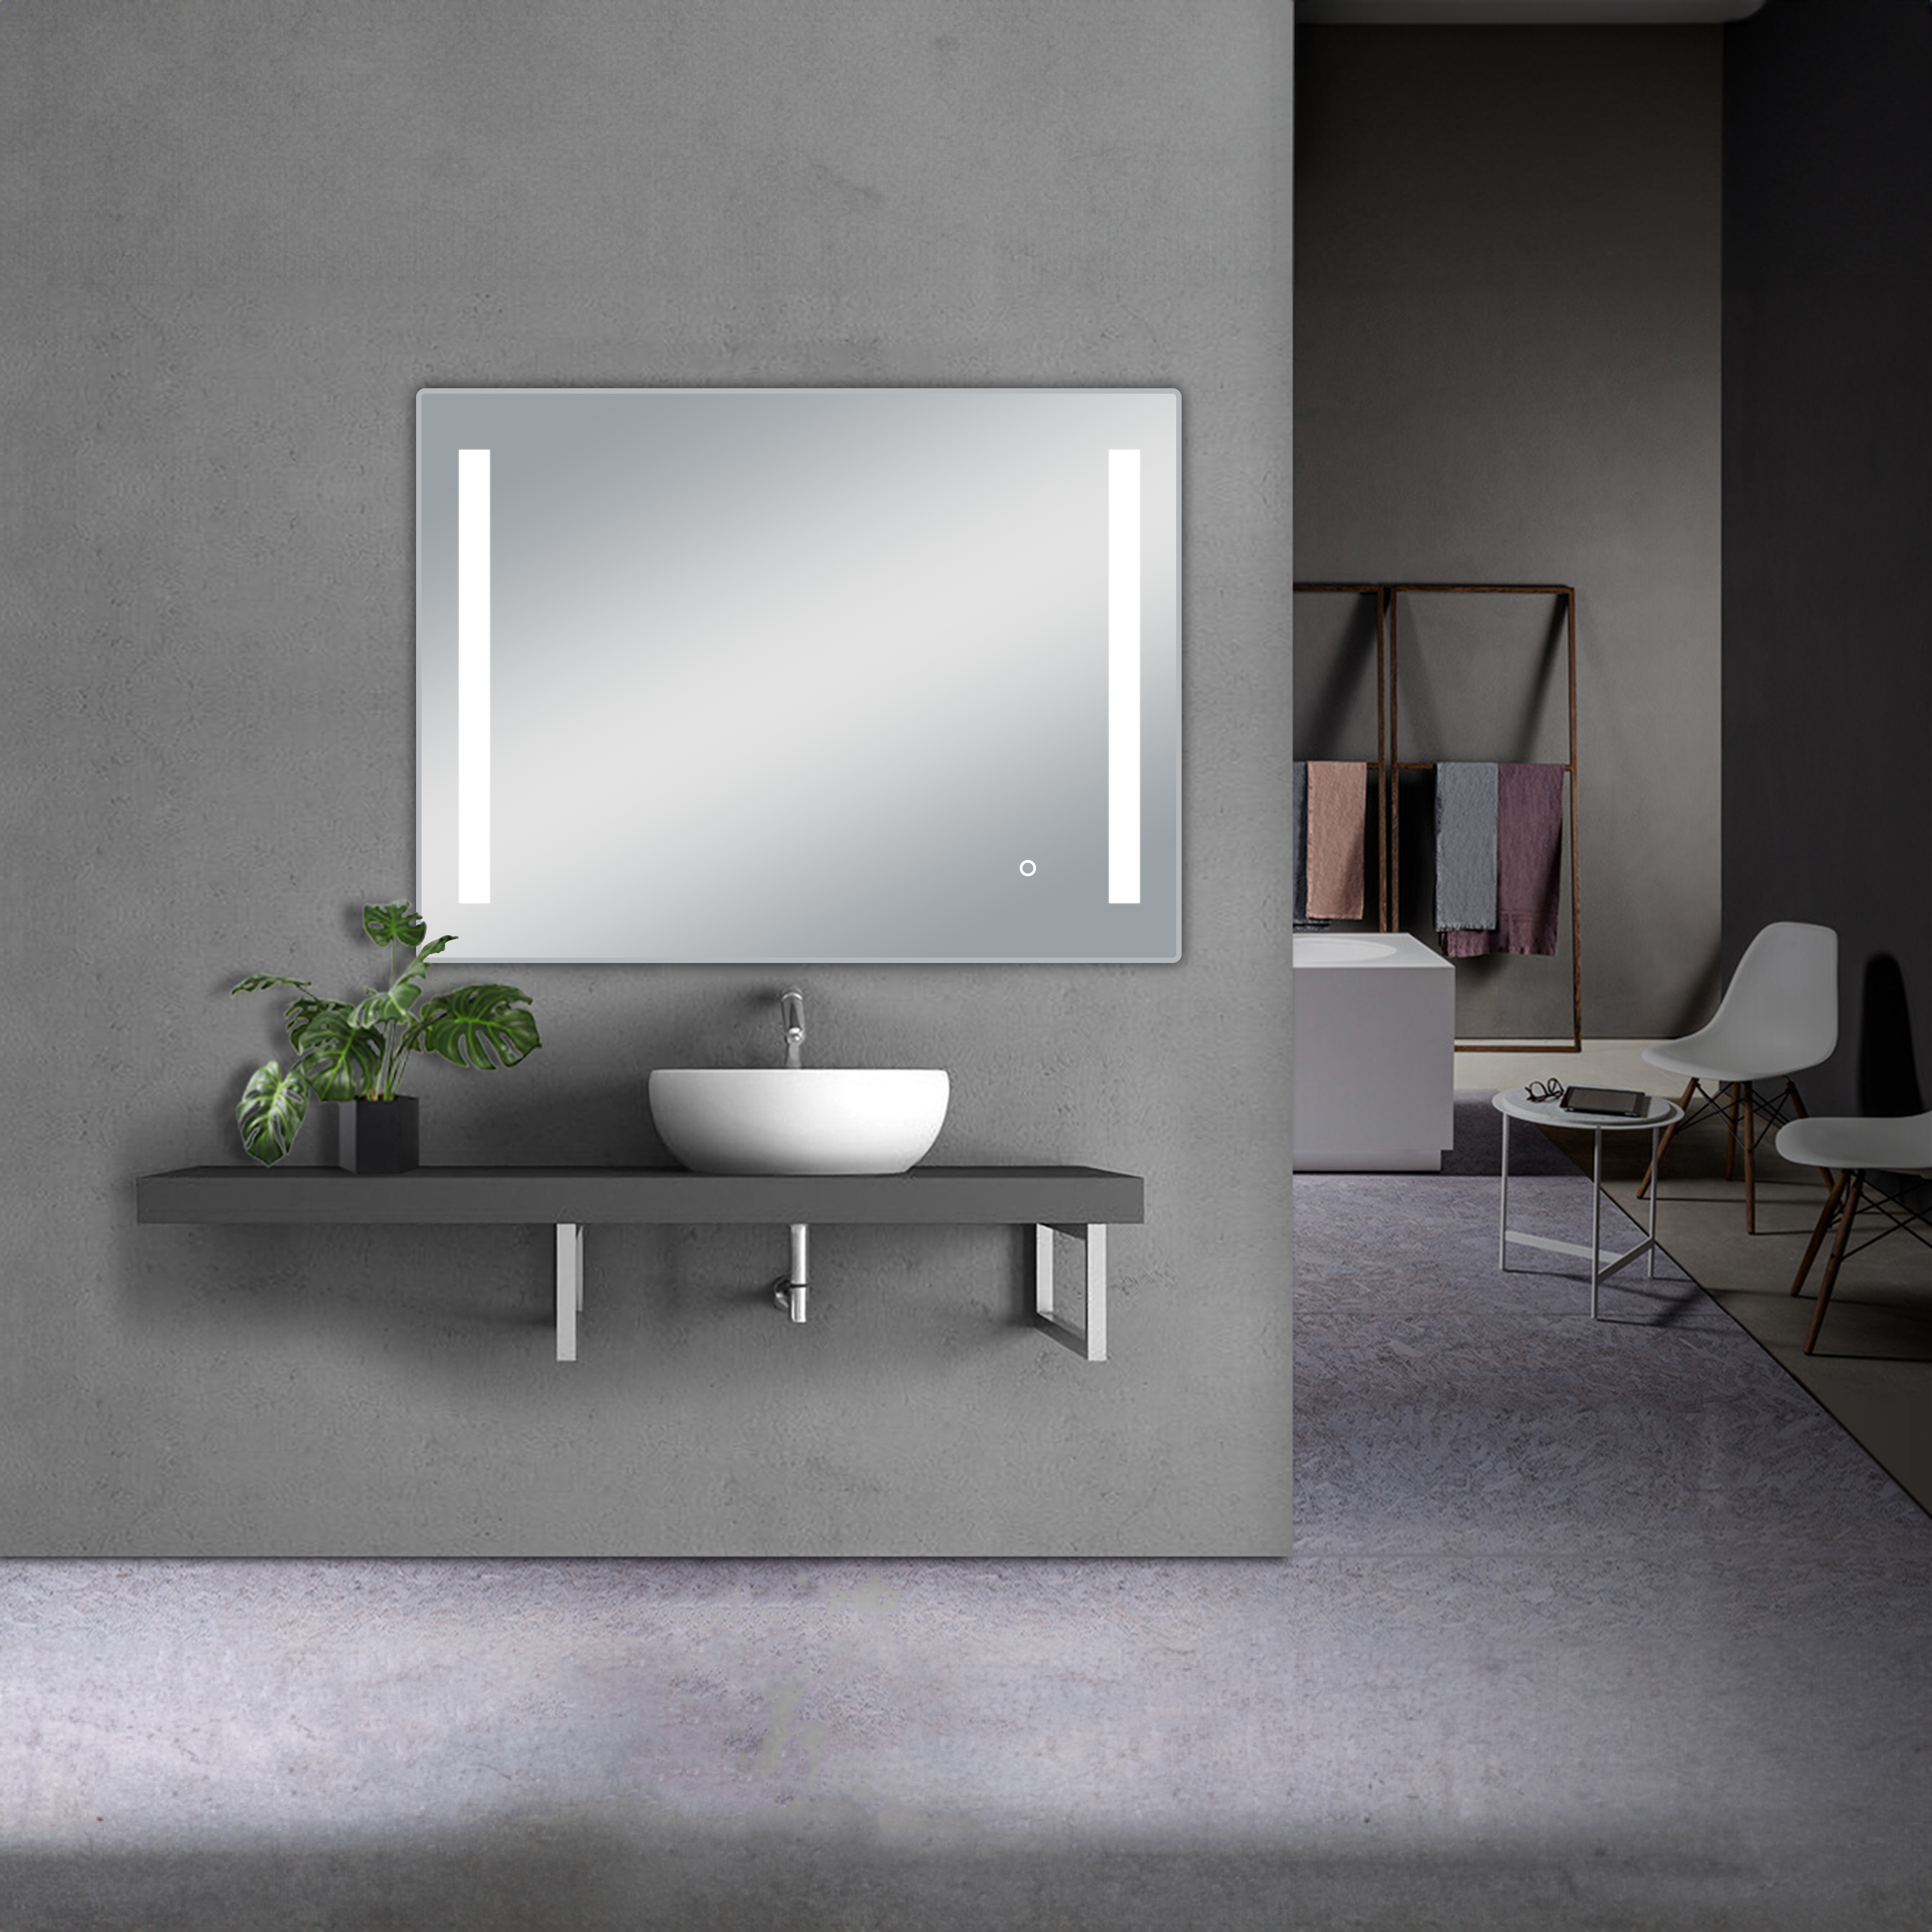 Treviso LED Mirror with Dimmer and Defogger - Available in 4 Sizes